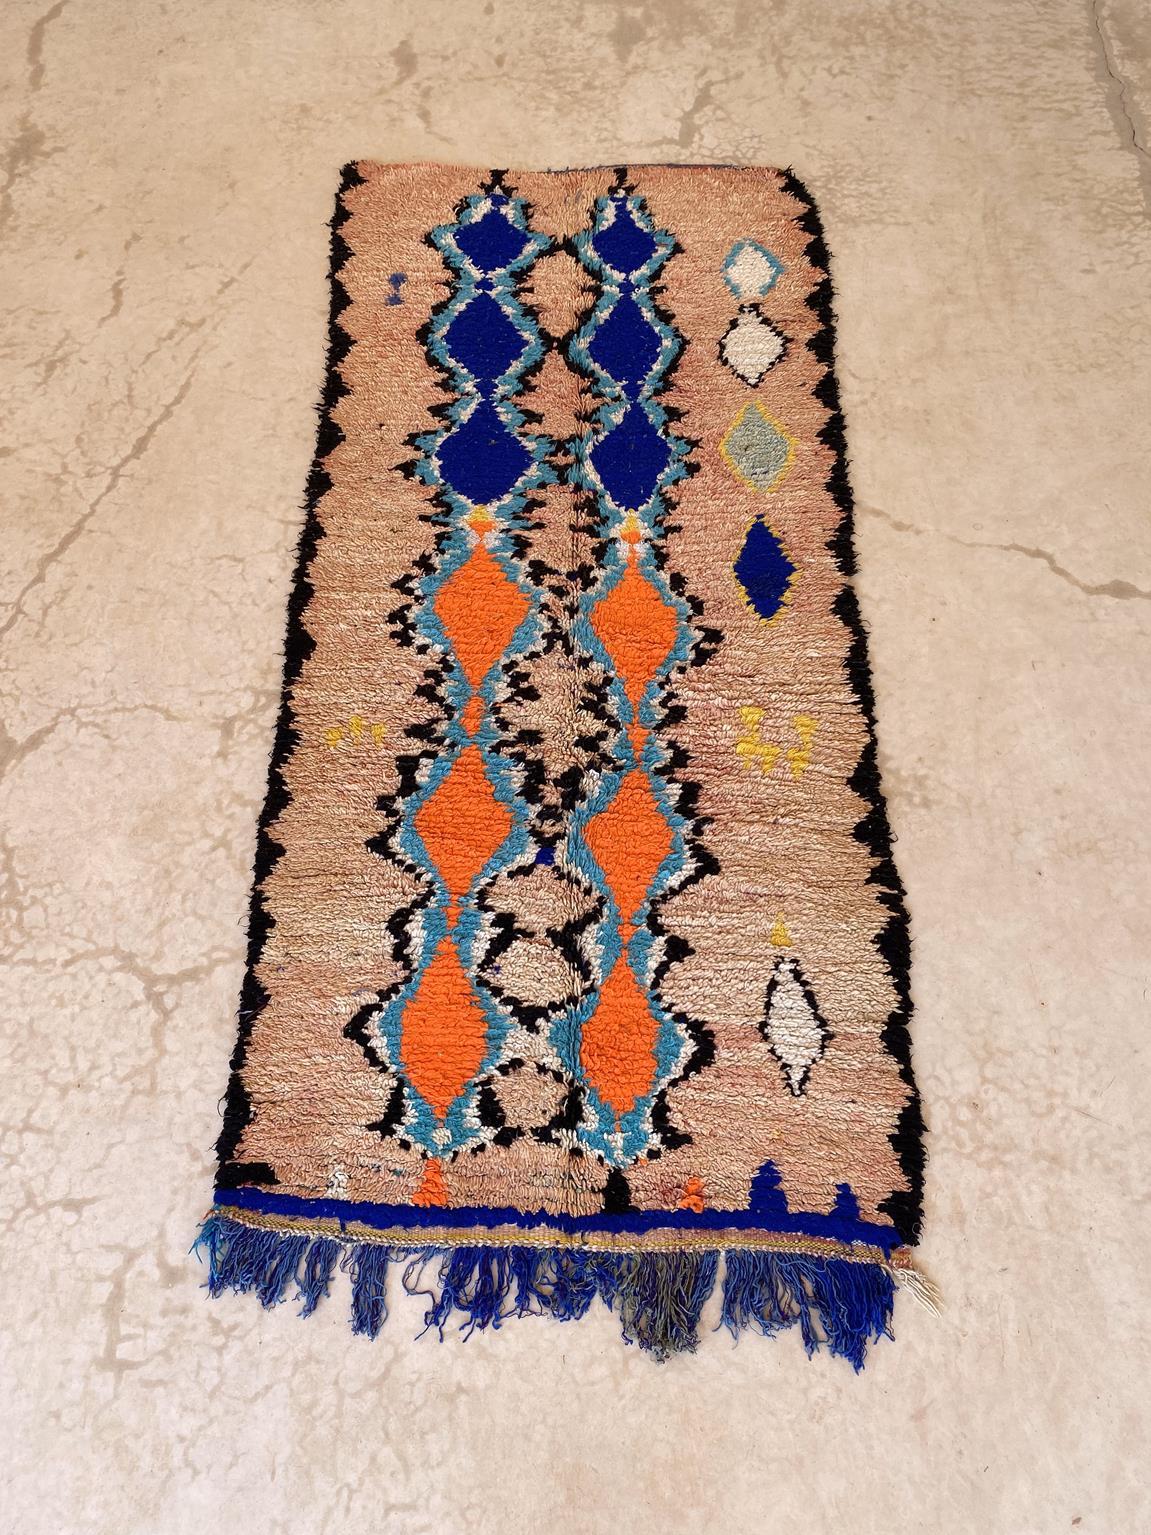 This lovely vintage Azilal runner rug just makes me happy! It shows such joyful colors and classic series of diamonds but with an 